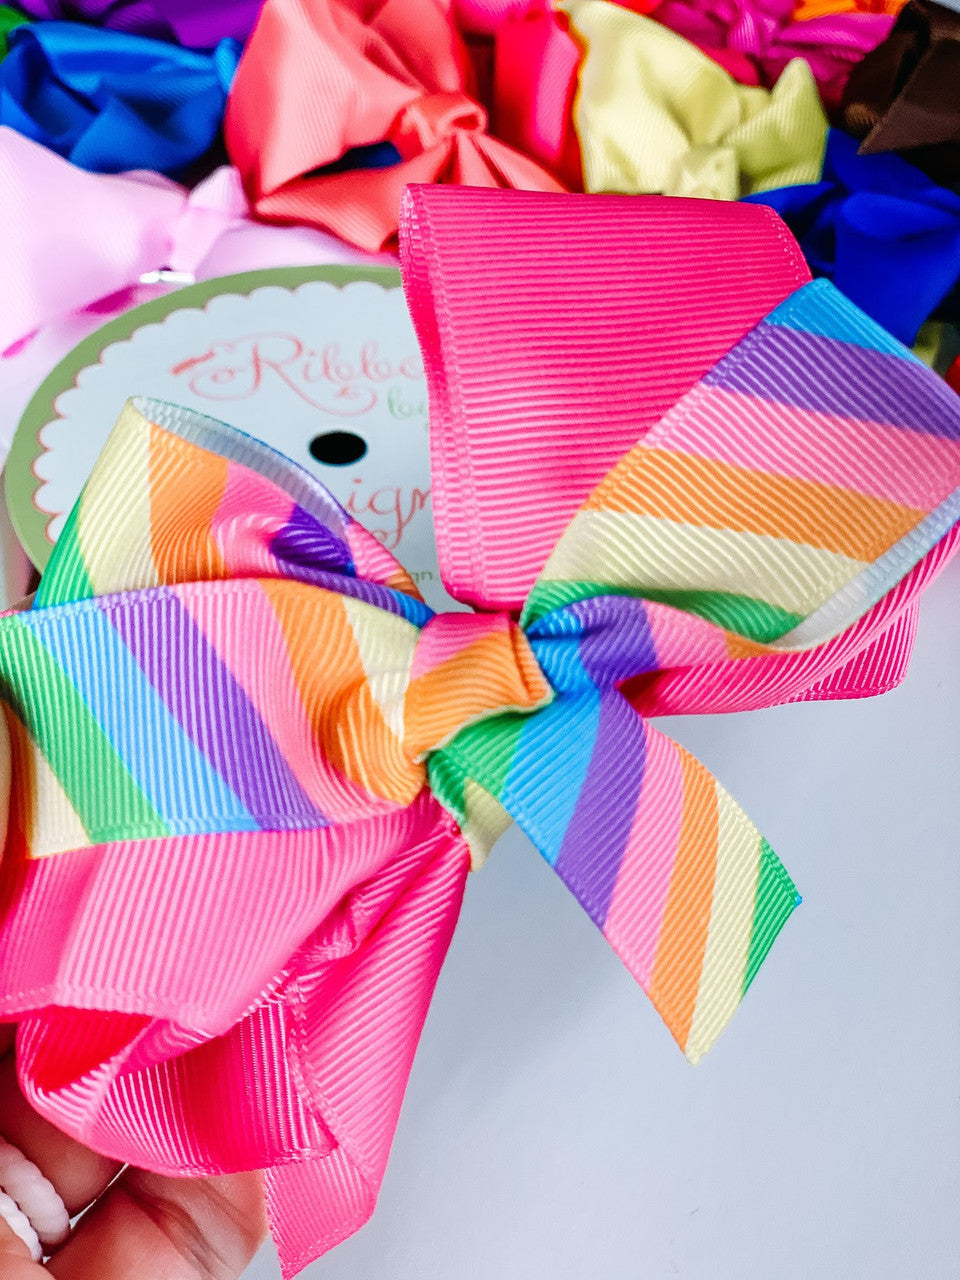 Cutest little hair bow to make a truly magical look!